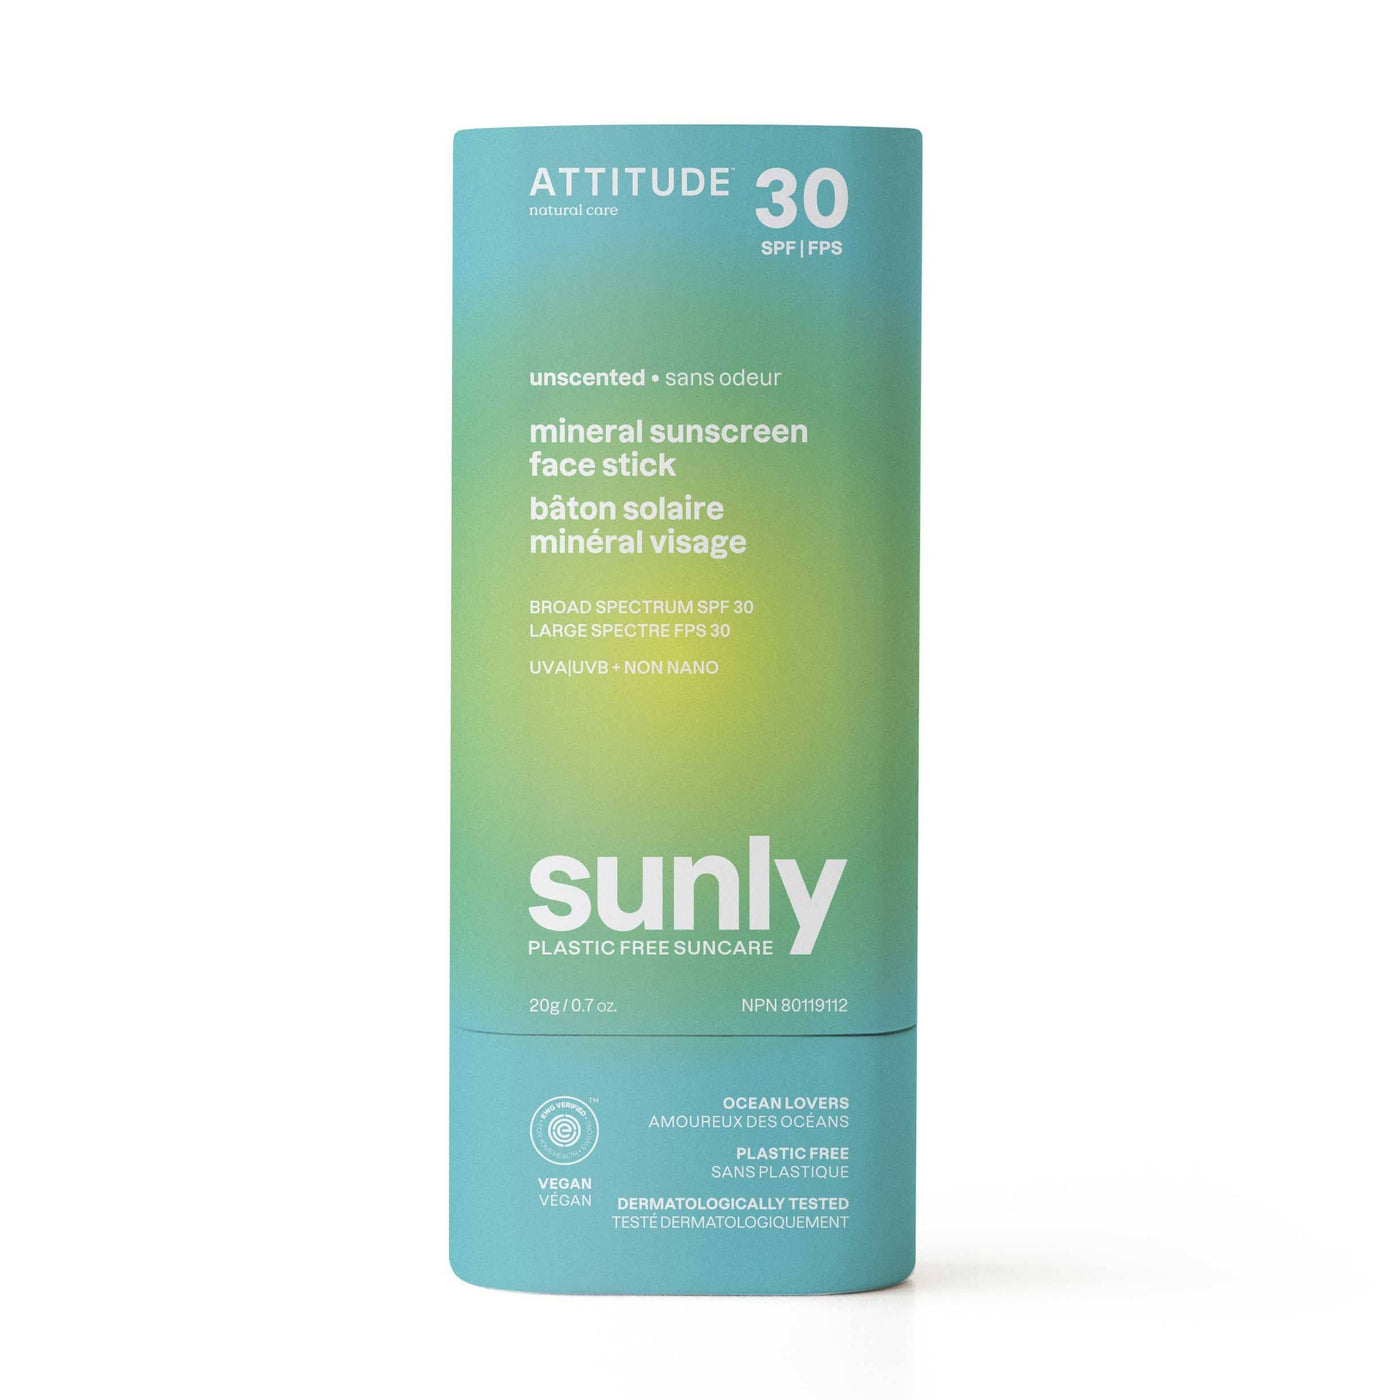 ATTITUDE | Unscented Sunscreen SPF 30 - Sunly, The Local Space, Local Canadian Brands 